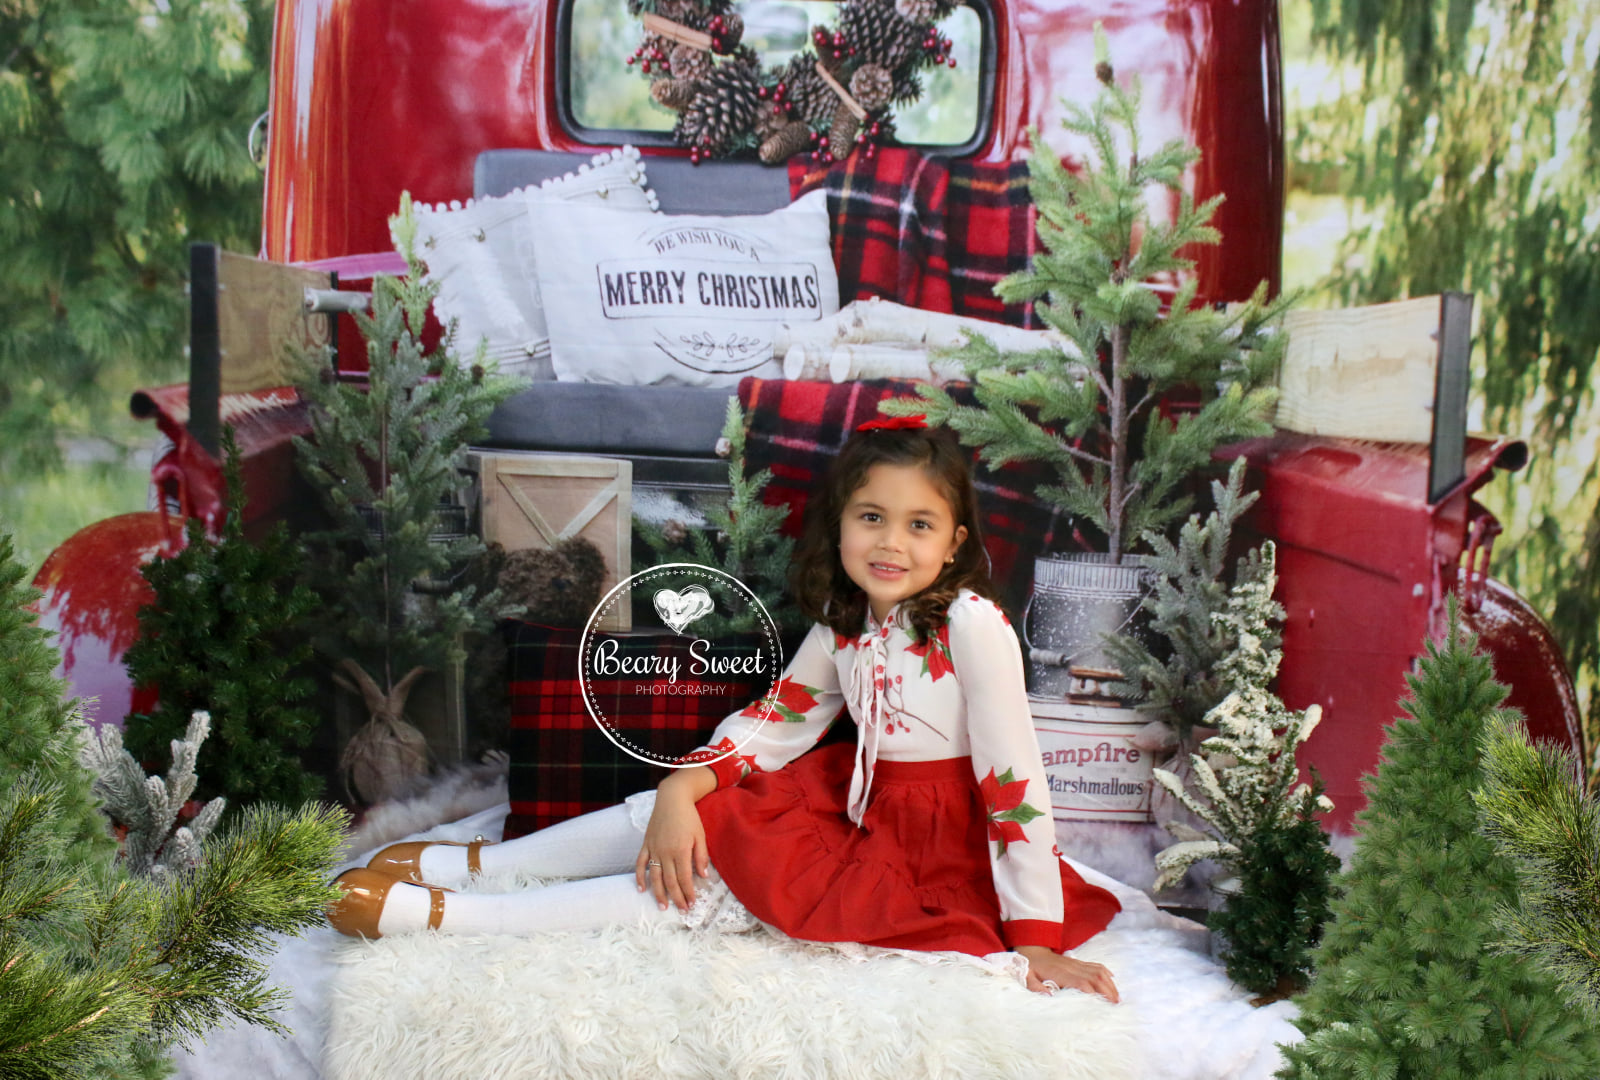 Kate 7x5ft Red Christmas Truck Backdrop for Photography (only ship to Canada)